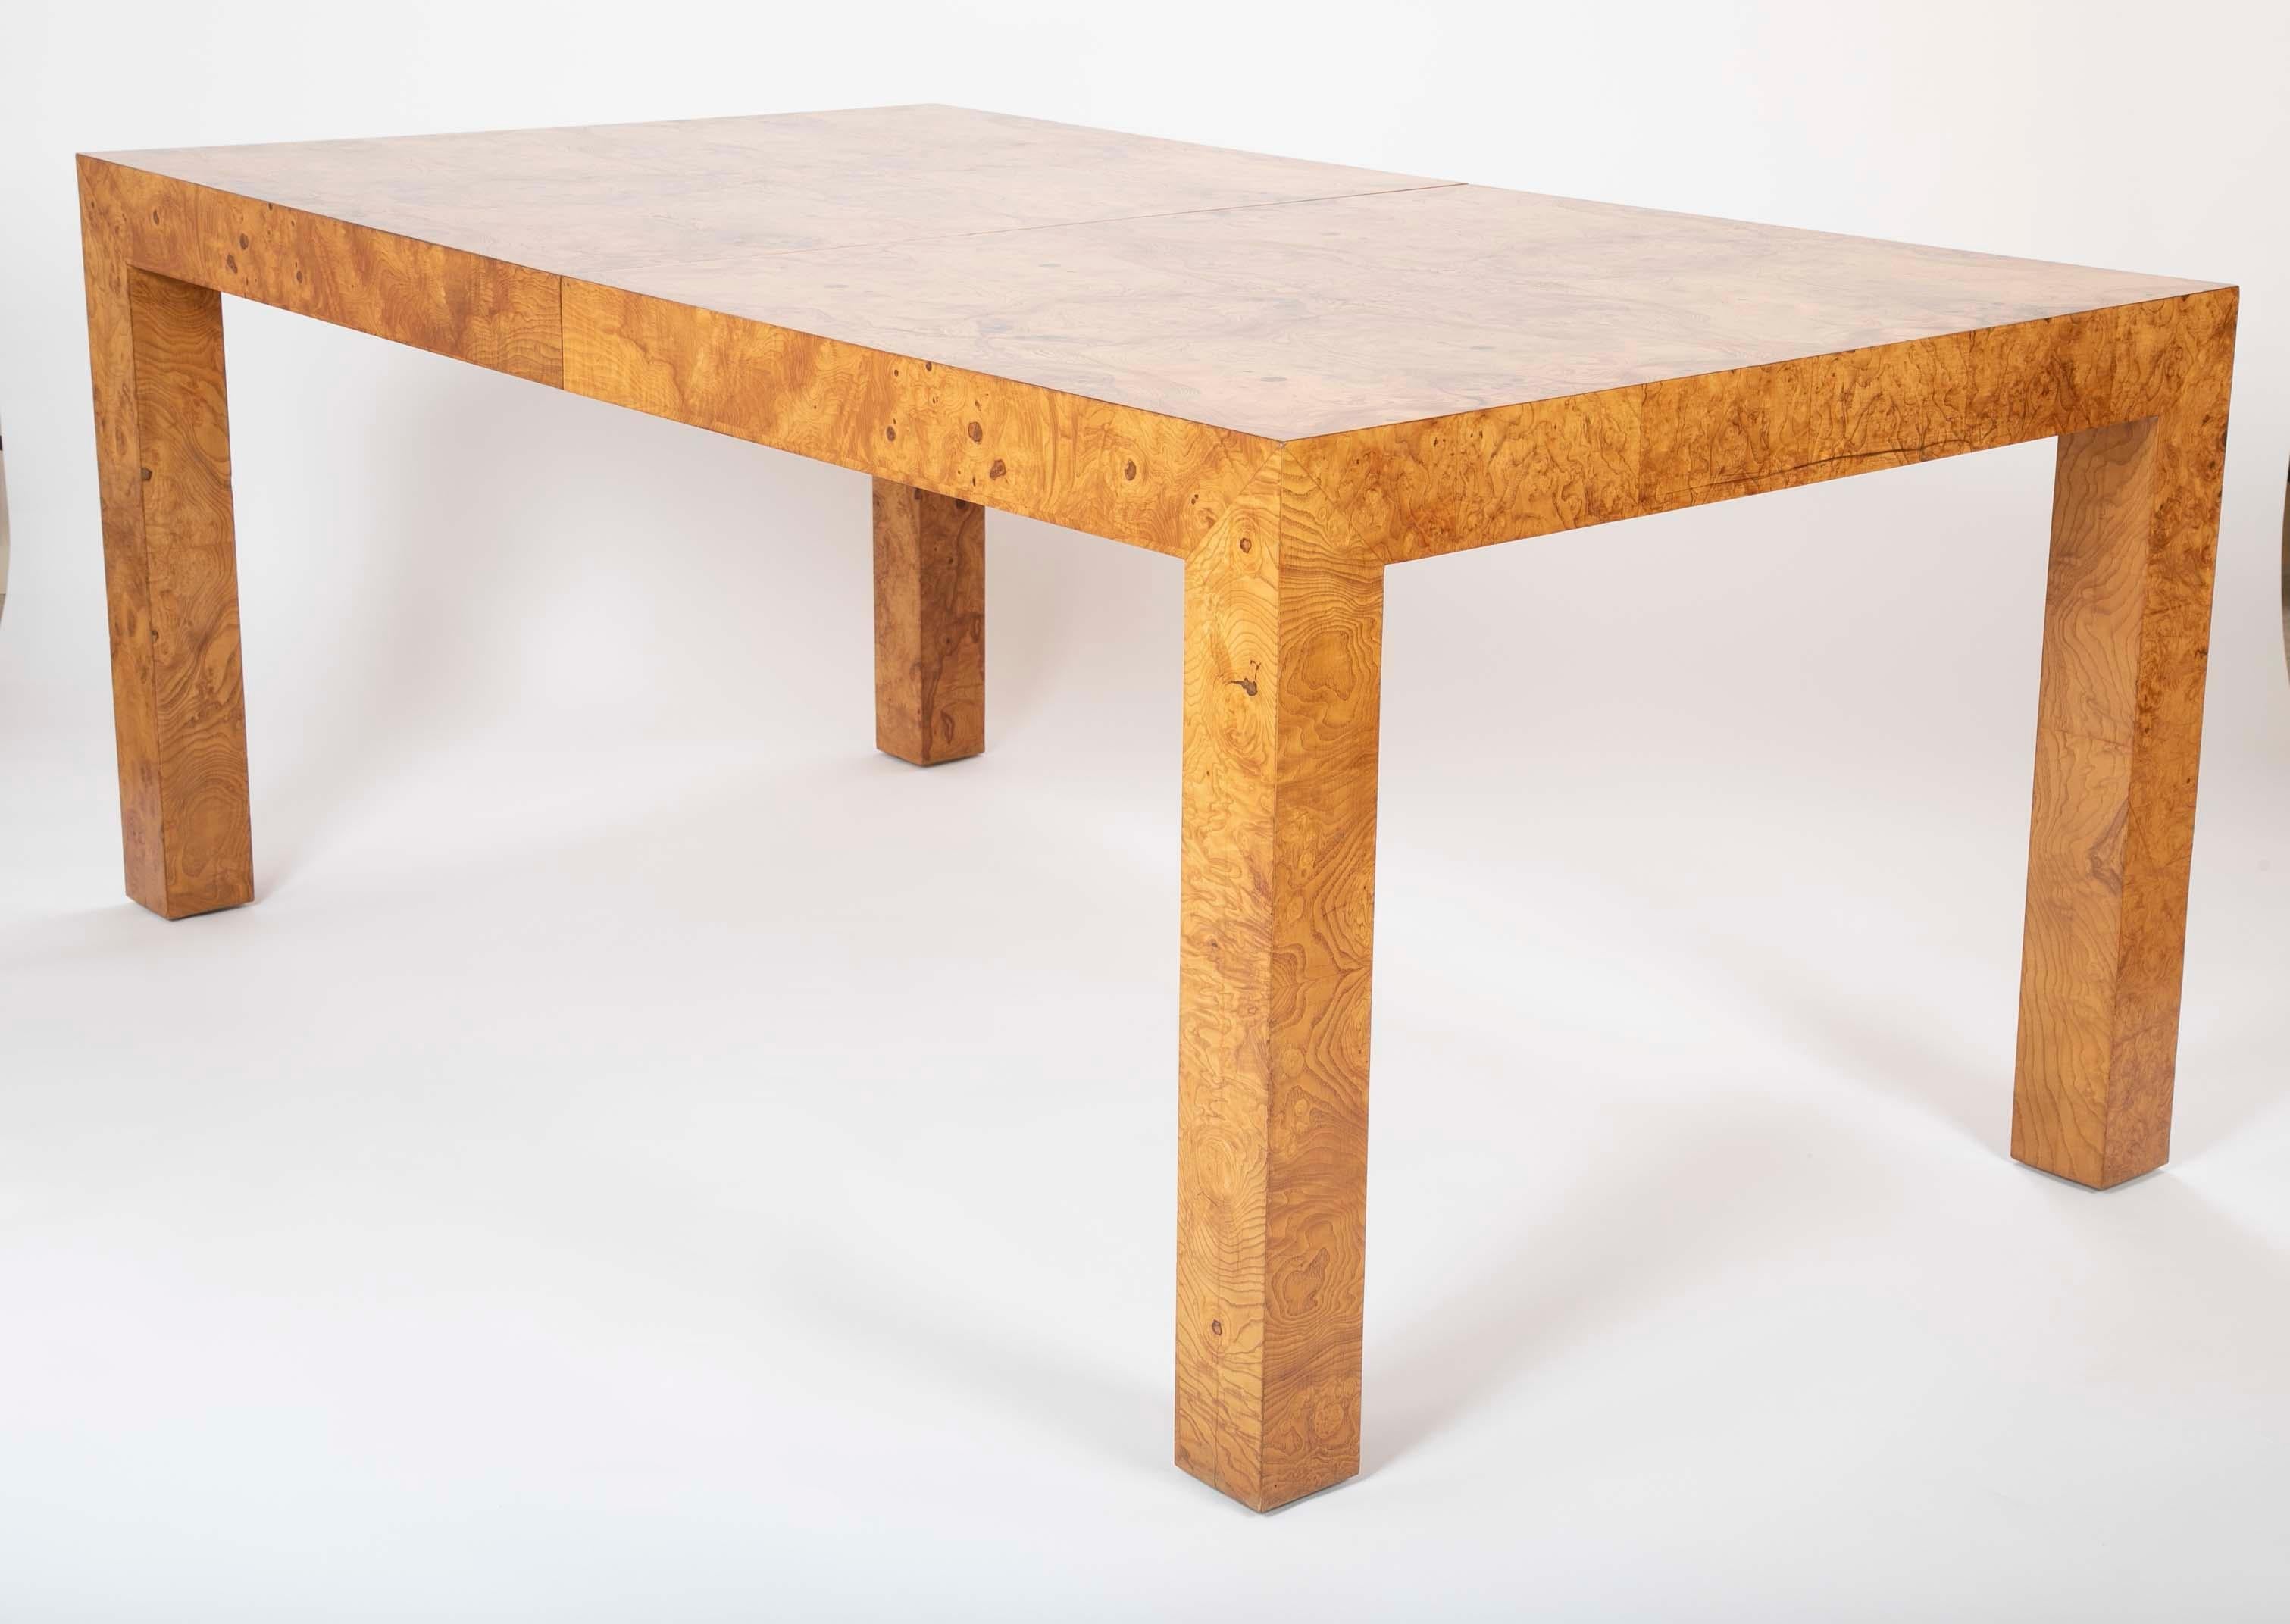 A Parsons style olivewood dining table design attributed to Milo Baughman. The table has 22